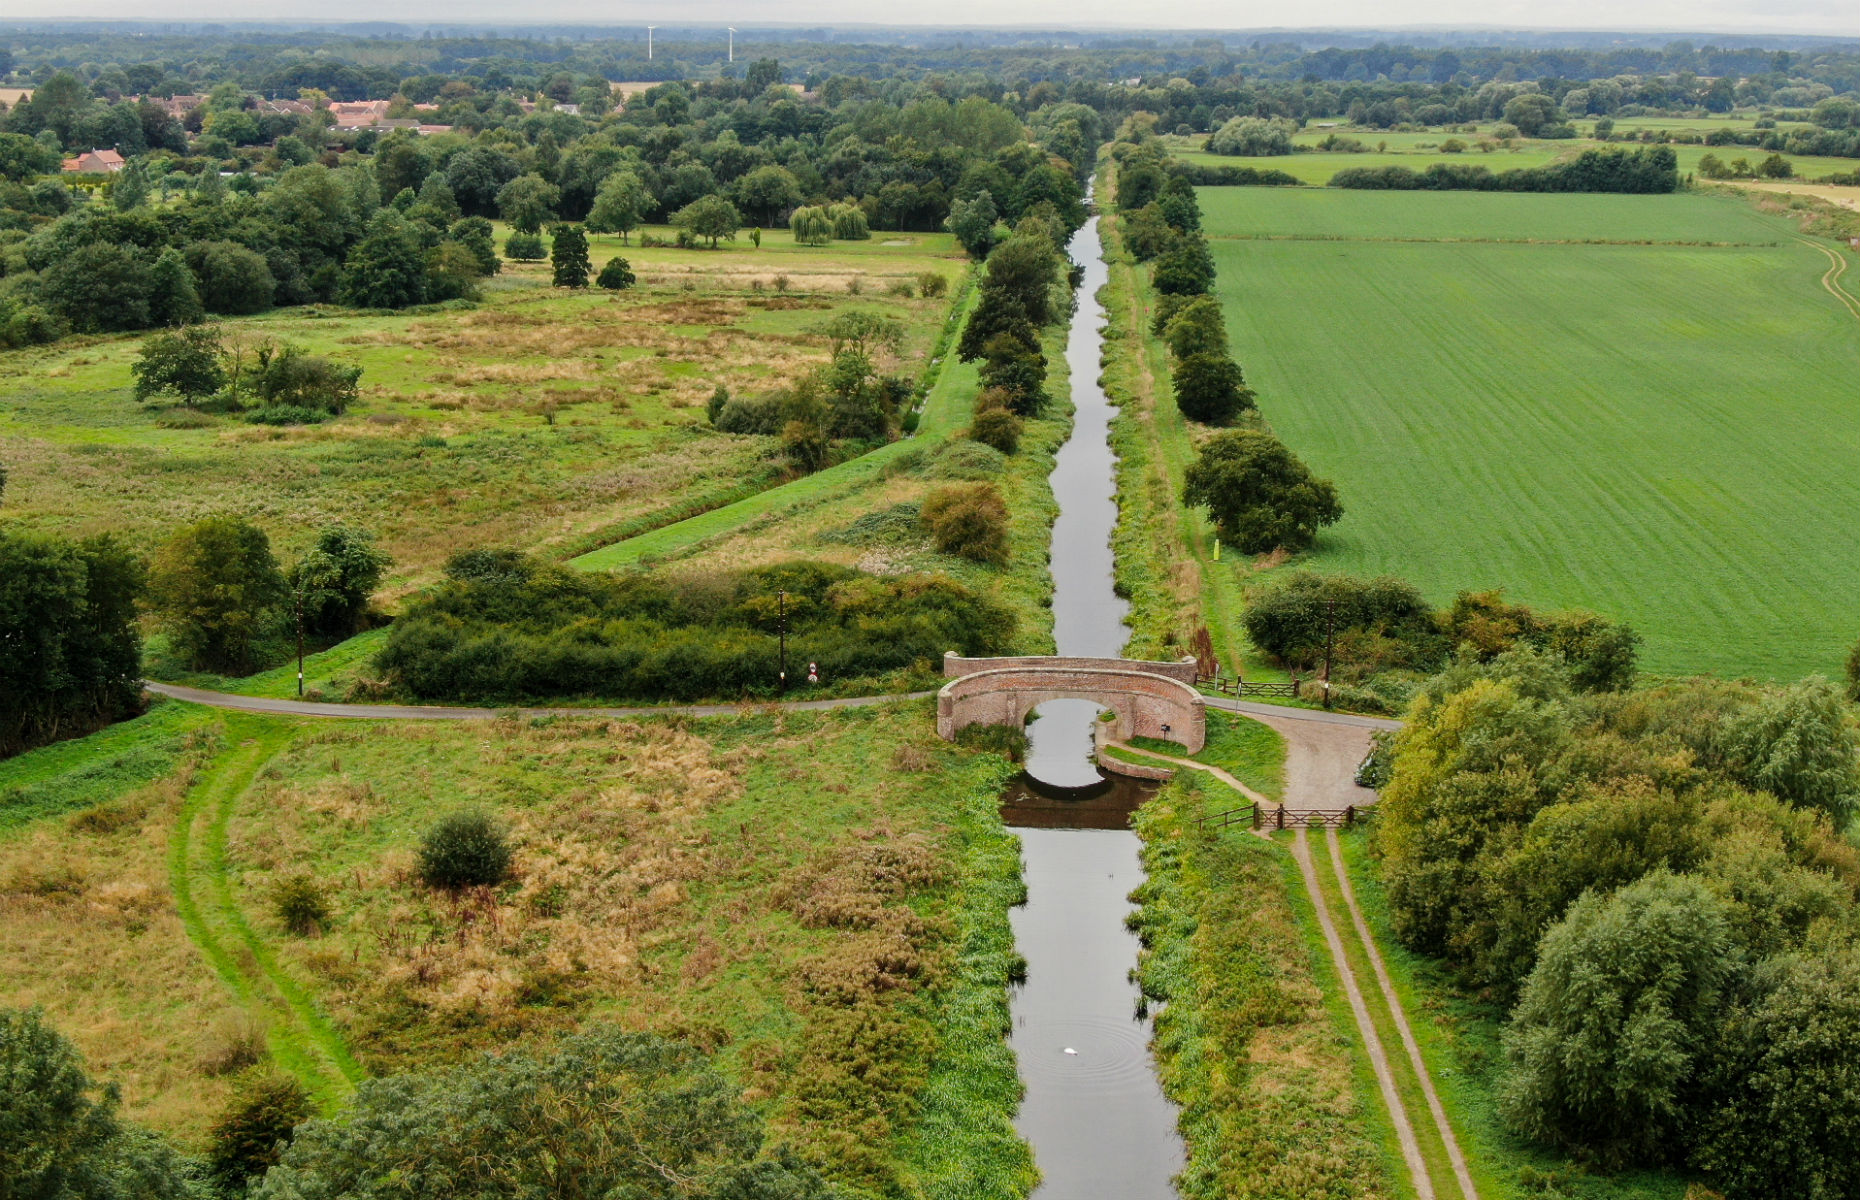 Pocklington Canal and surrounding countryside in East Yorkshire (Image: LFM Visuals/Shutterstock)